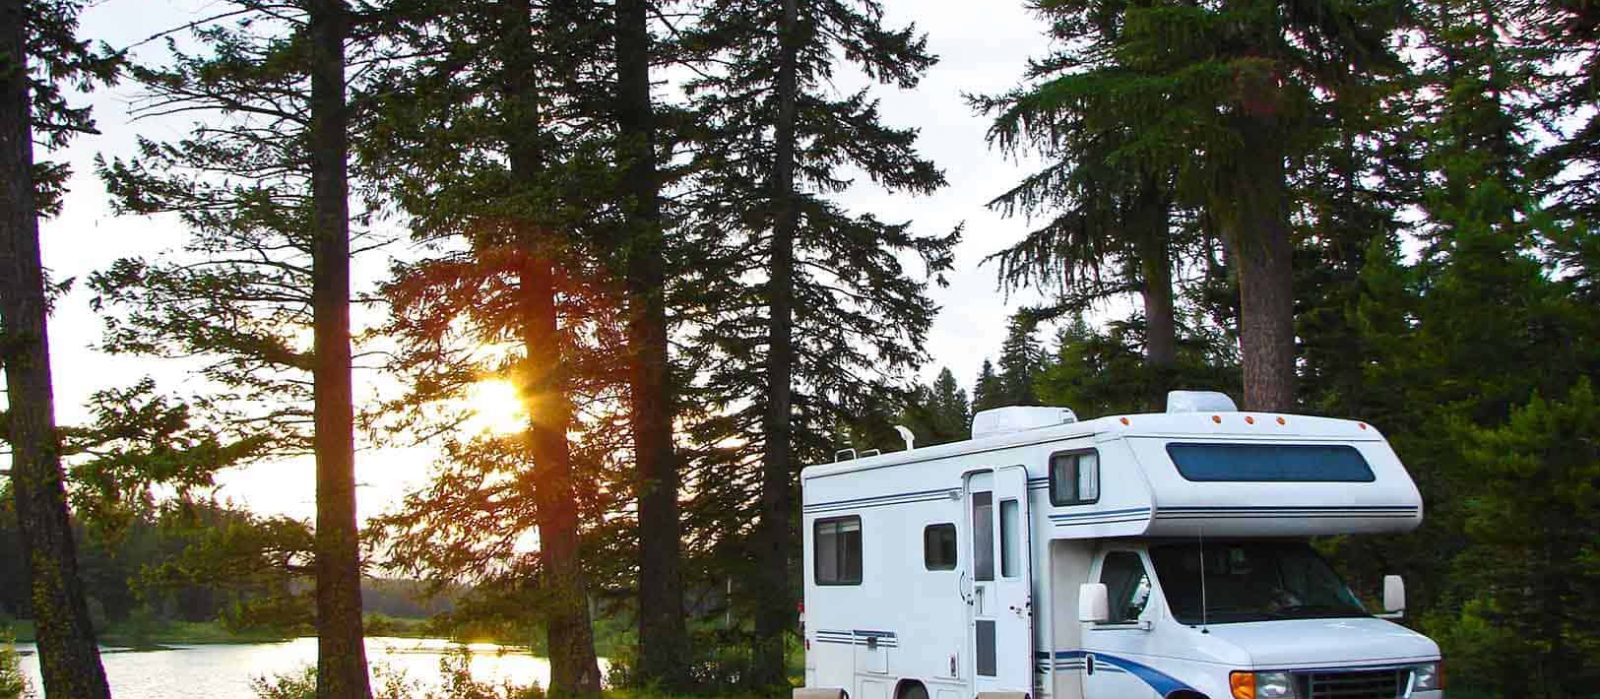 cheapest state to buy an RV